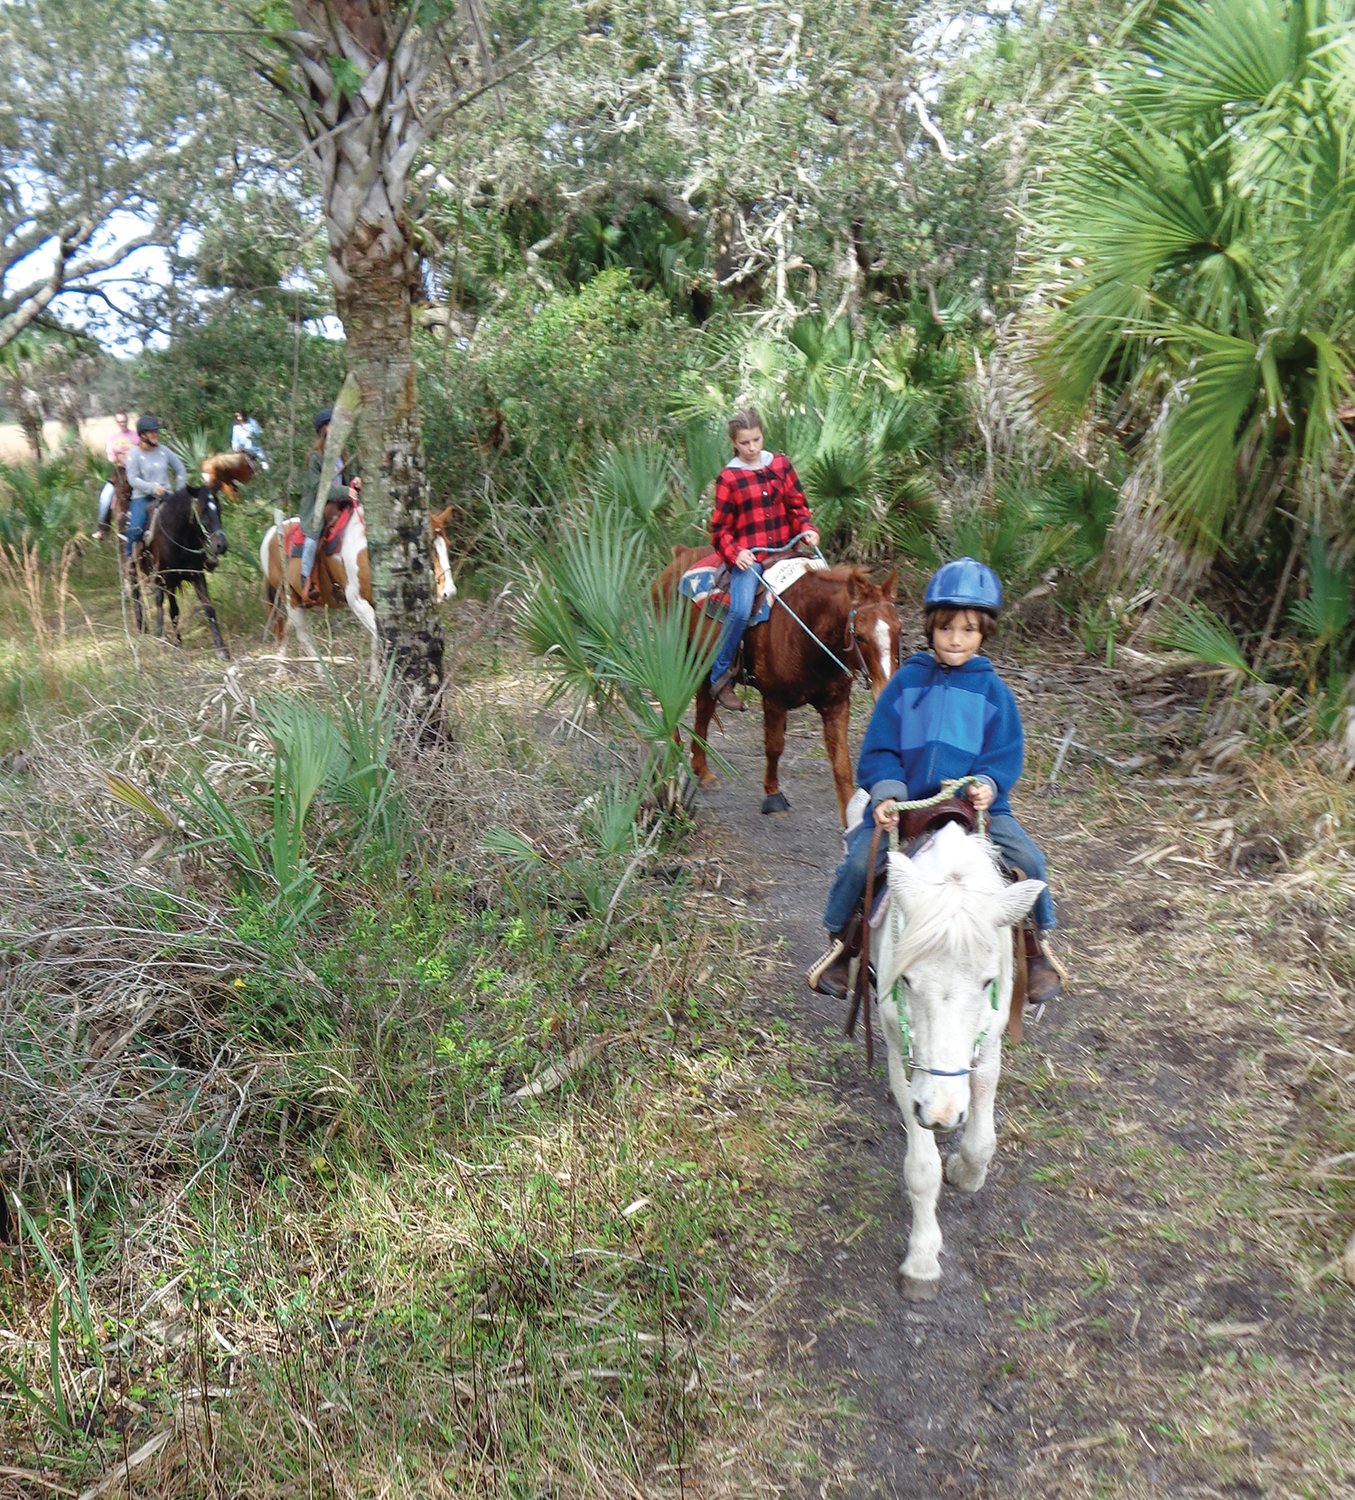 OKEECHOBEE — The annual Trot for Toys event takes place at Kissimmee Prairie Preserve State Park. Participants bring their own horses.